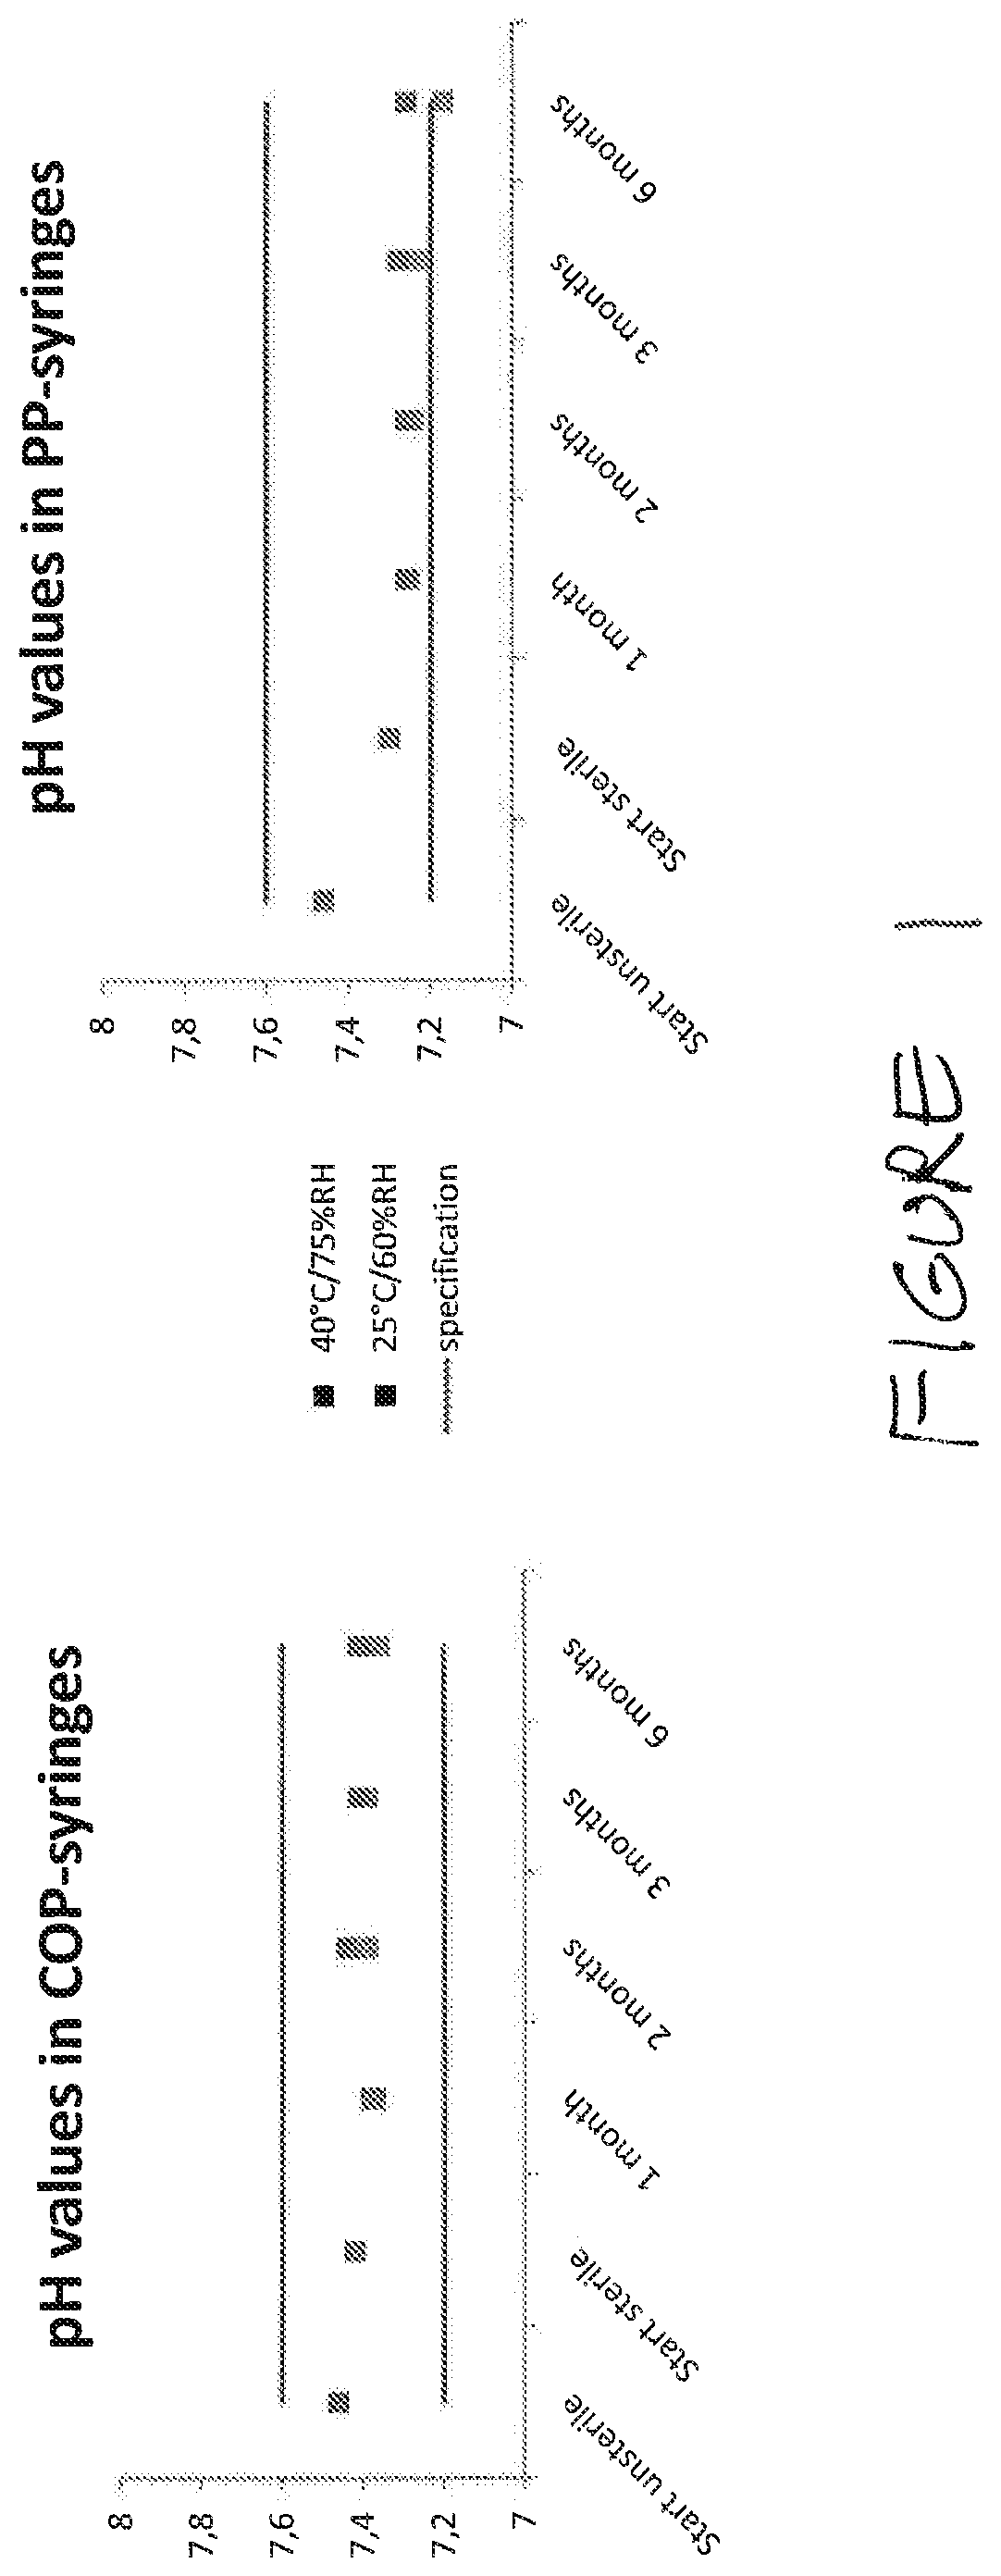 Article of manufacture comprising local anesthetic, buffer, and glycosaminoglycan in syringe with improved stability